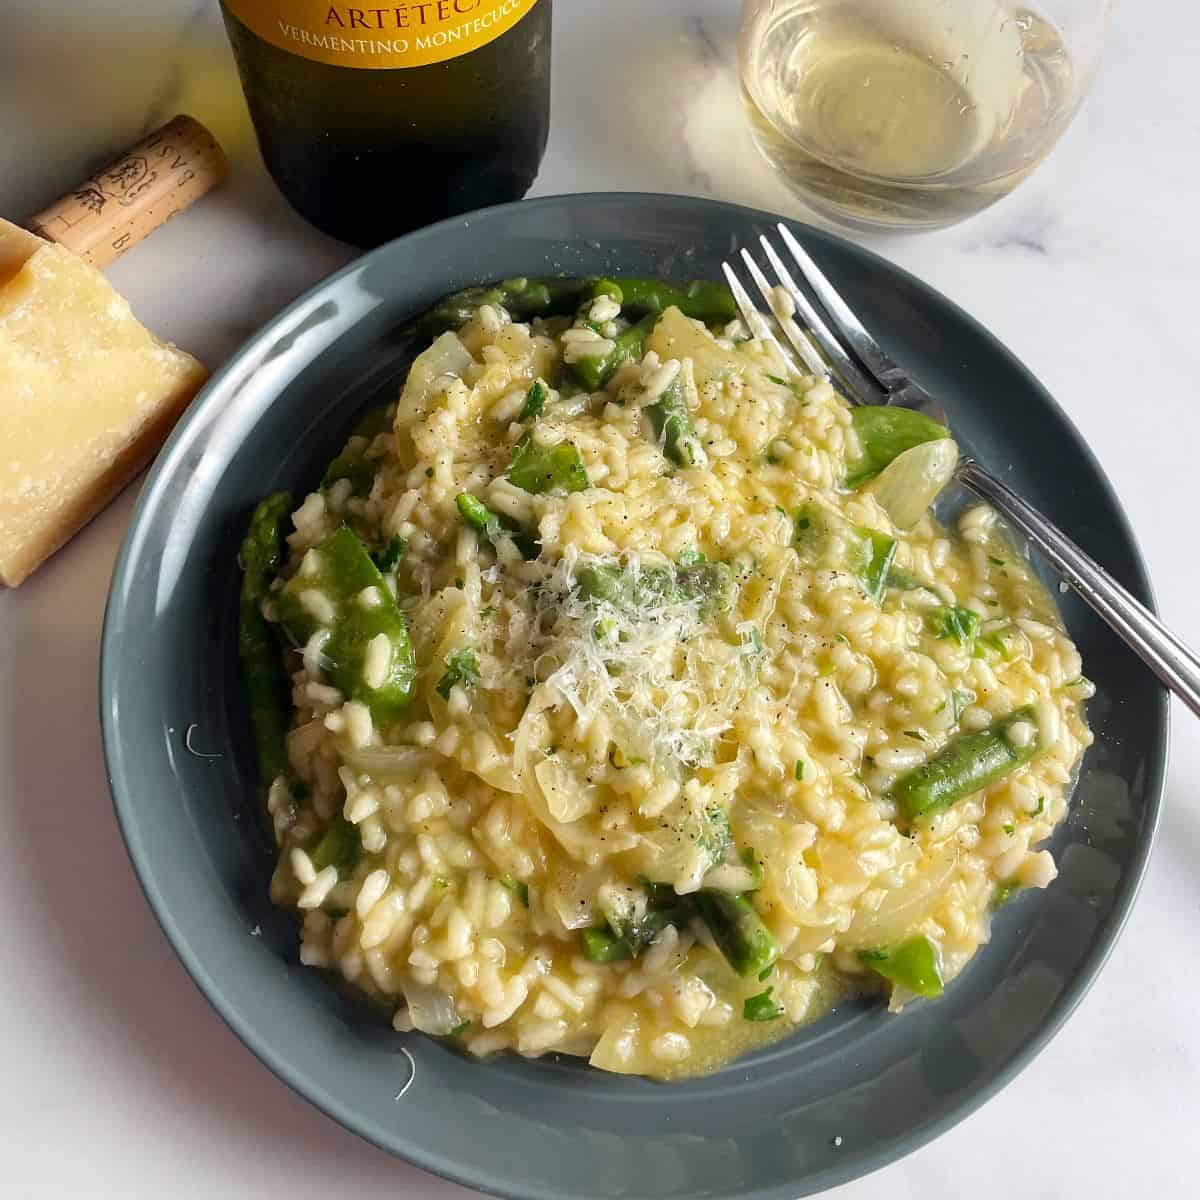 pea and asparagus risotto plated along with Vermentino white wine in the background.